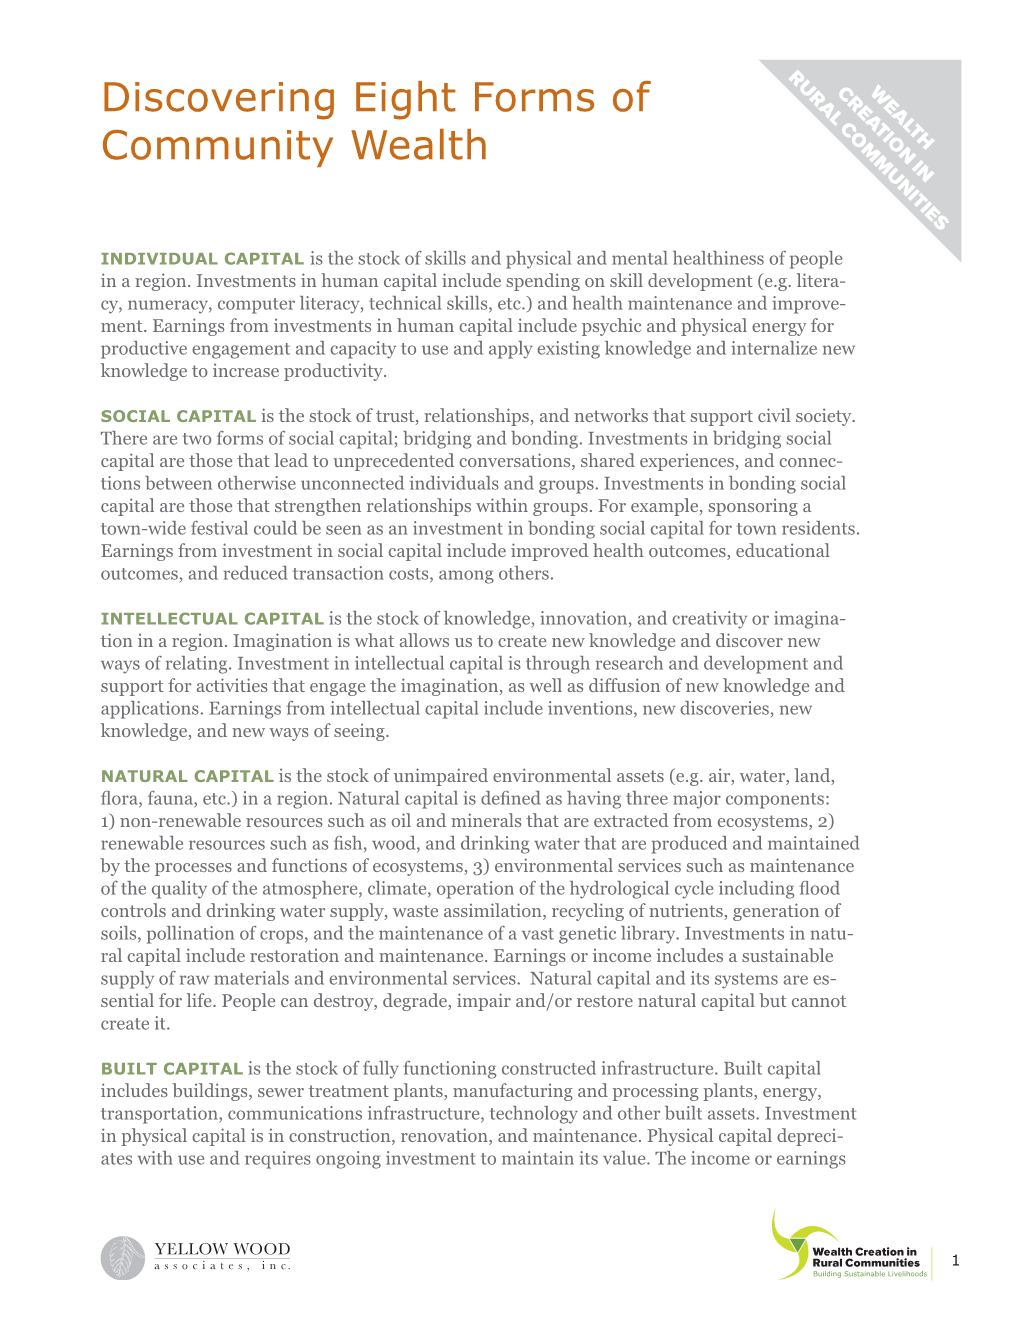 Discovering Eight Forms of Community Wealth